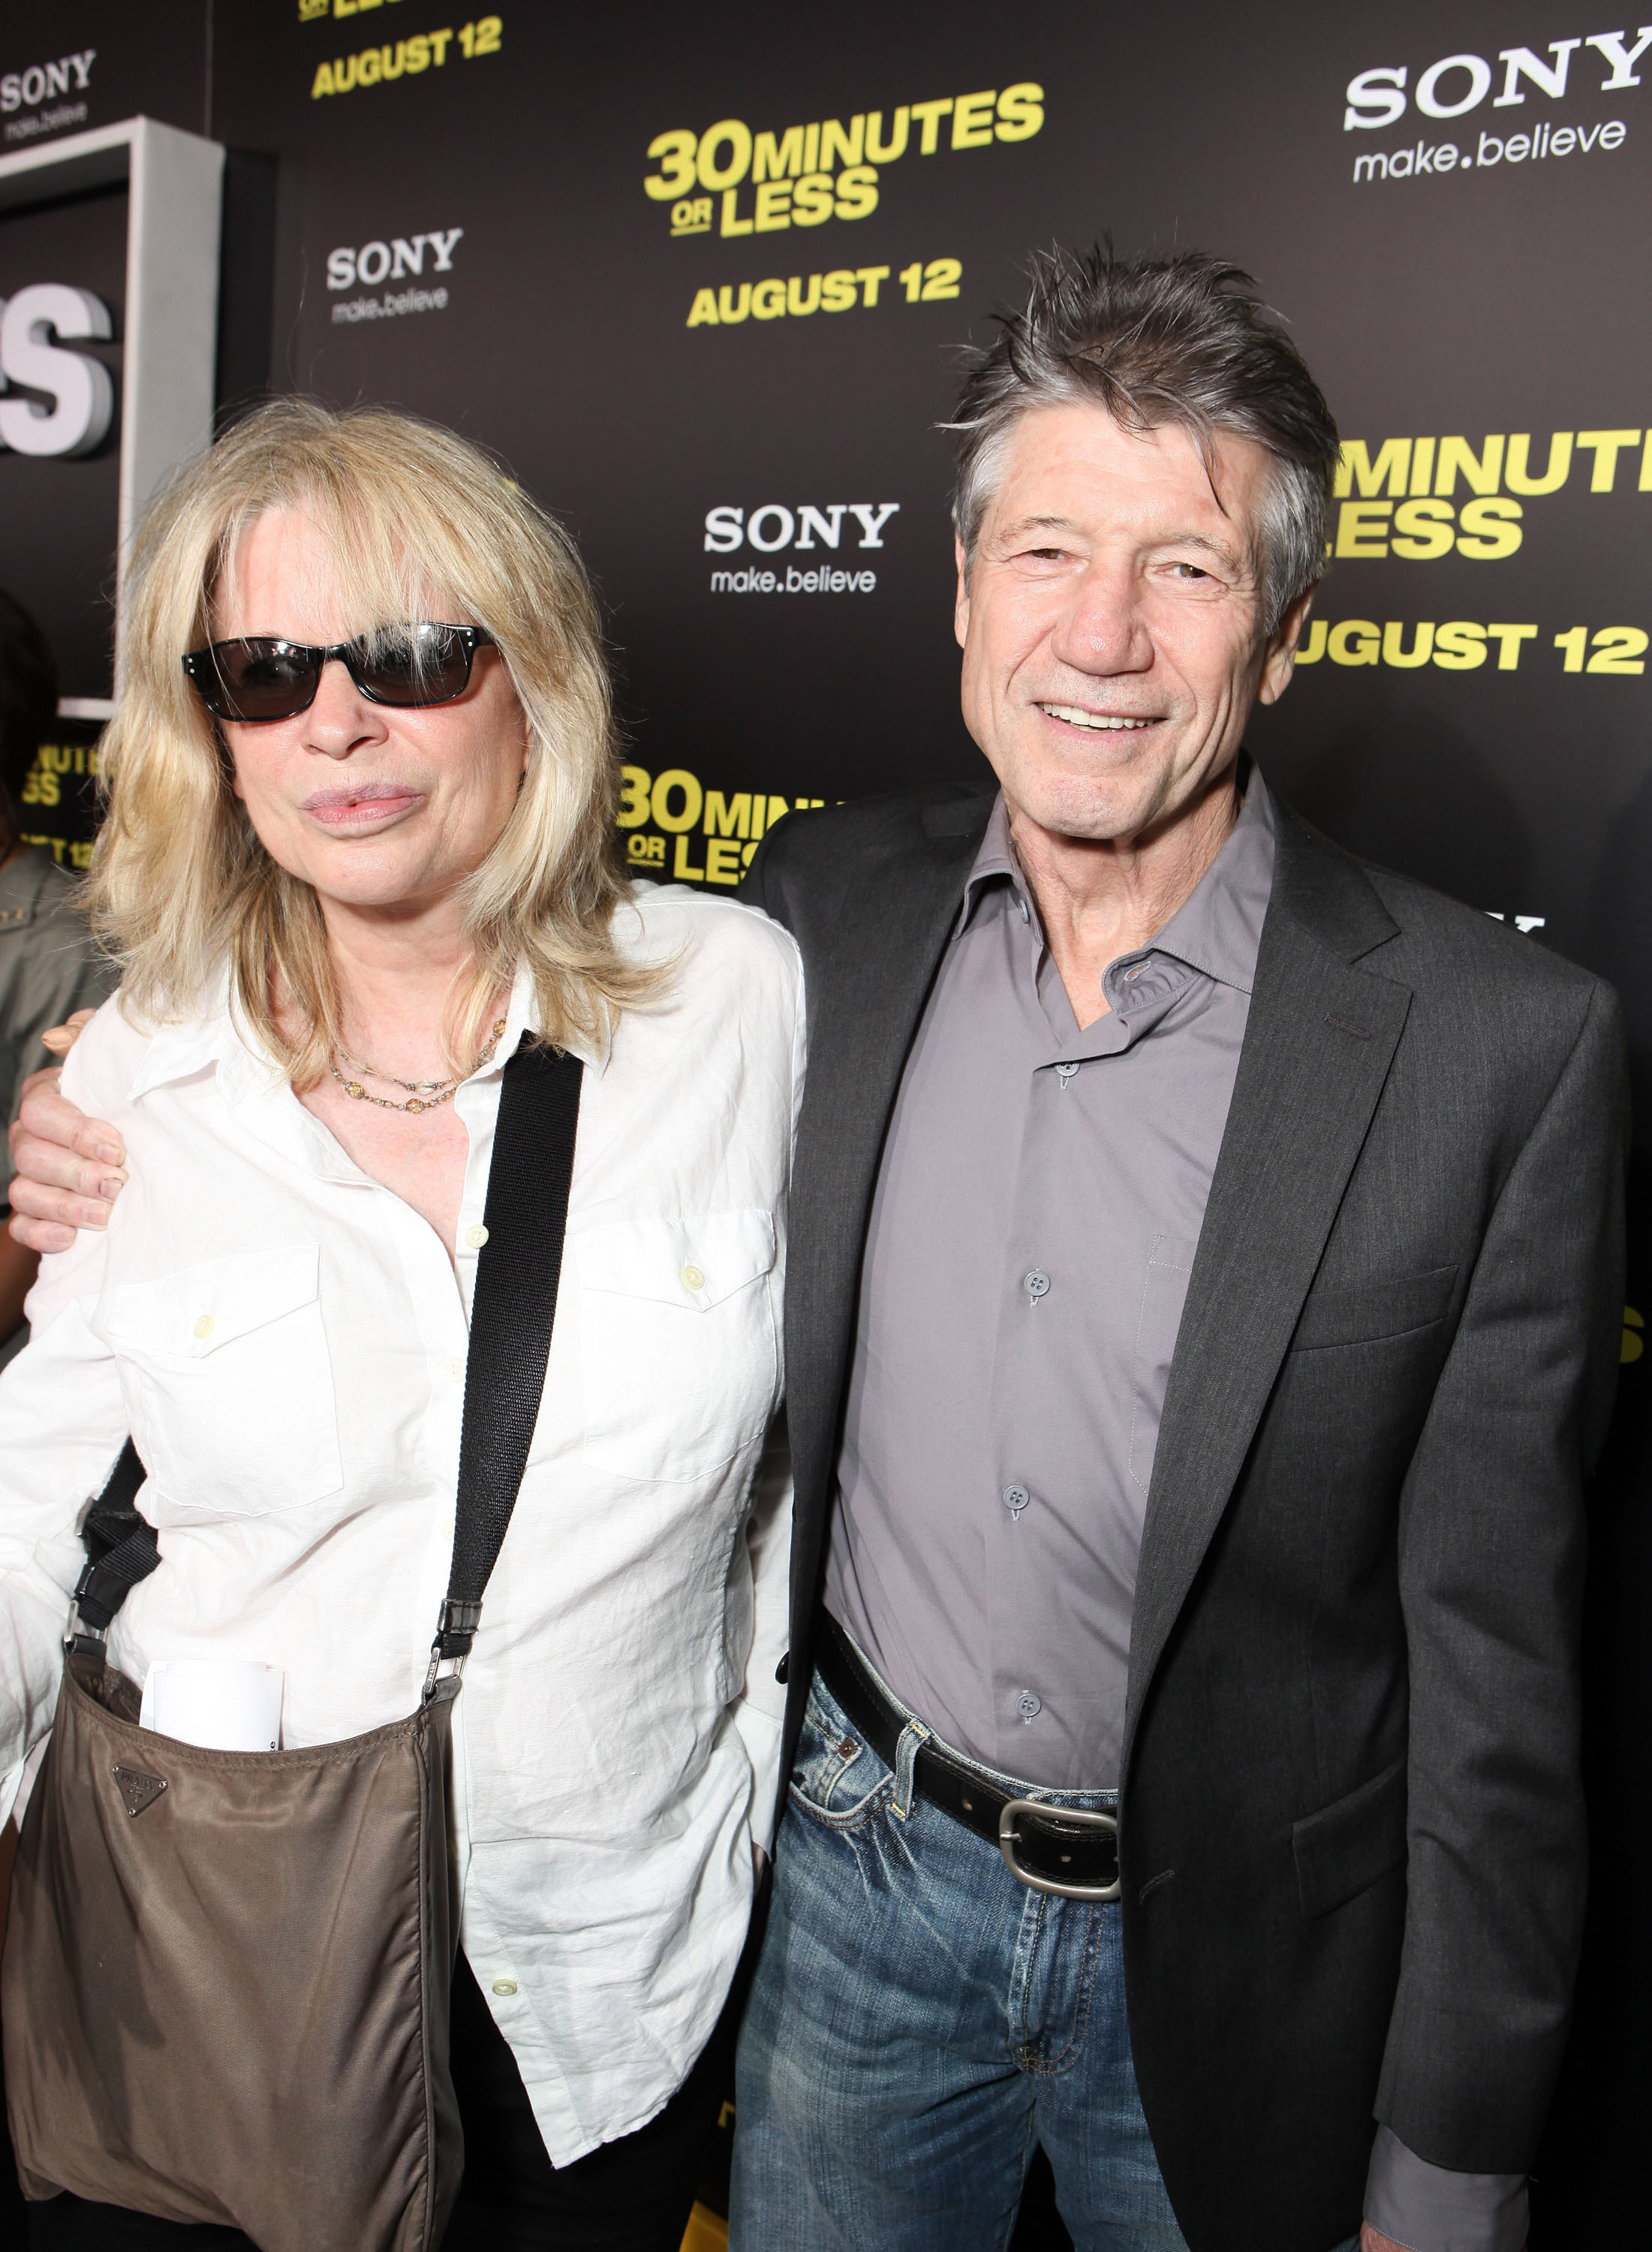 Marie-France Ward and Fred Ward at the premiere of "30 Minutes Or Less" on August 8, 2011, in Hollywood, California. | Source: Getty Images